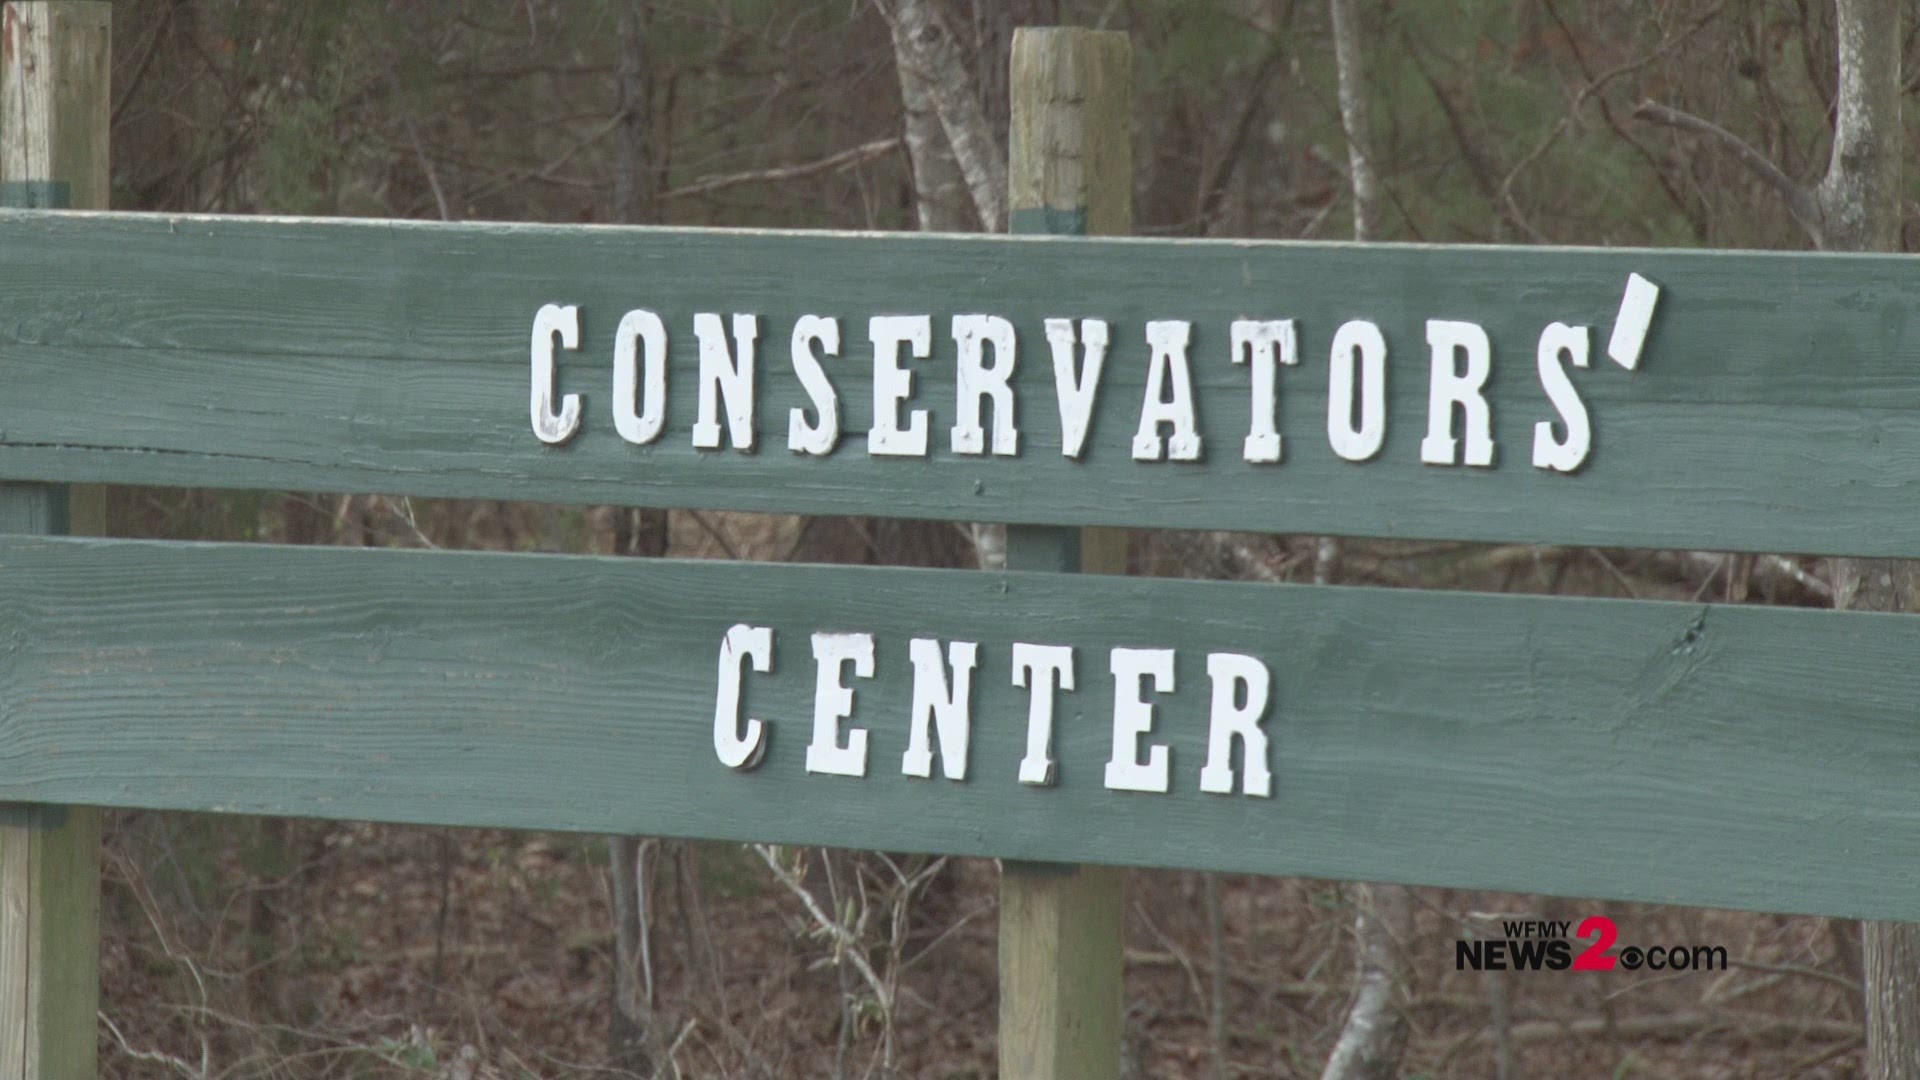 A Lion at the Conservator Center in Caswell County killed a 22-year-old Intern who was with a team cleaning an enclosure. Deputies had to kill the lion after attempts to tranqualize it failed. The Center is closed until further notice.